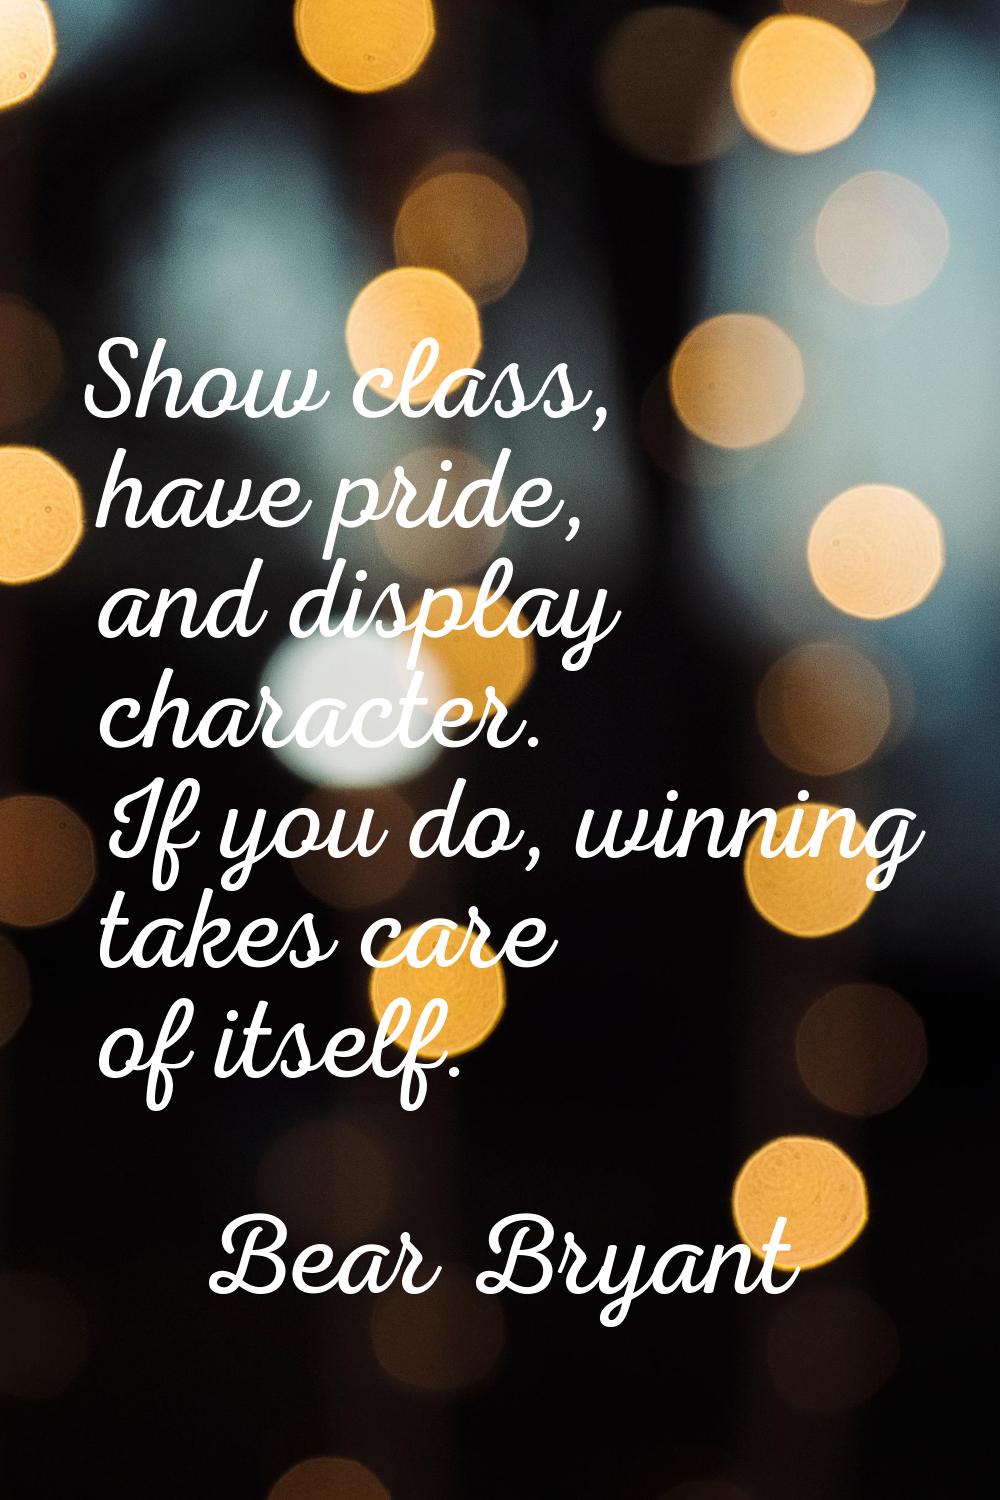 Show class, have pride, and display character. If you do, winning takes care of itself.